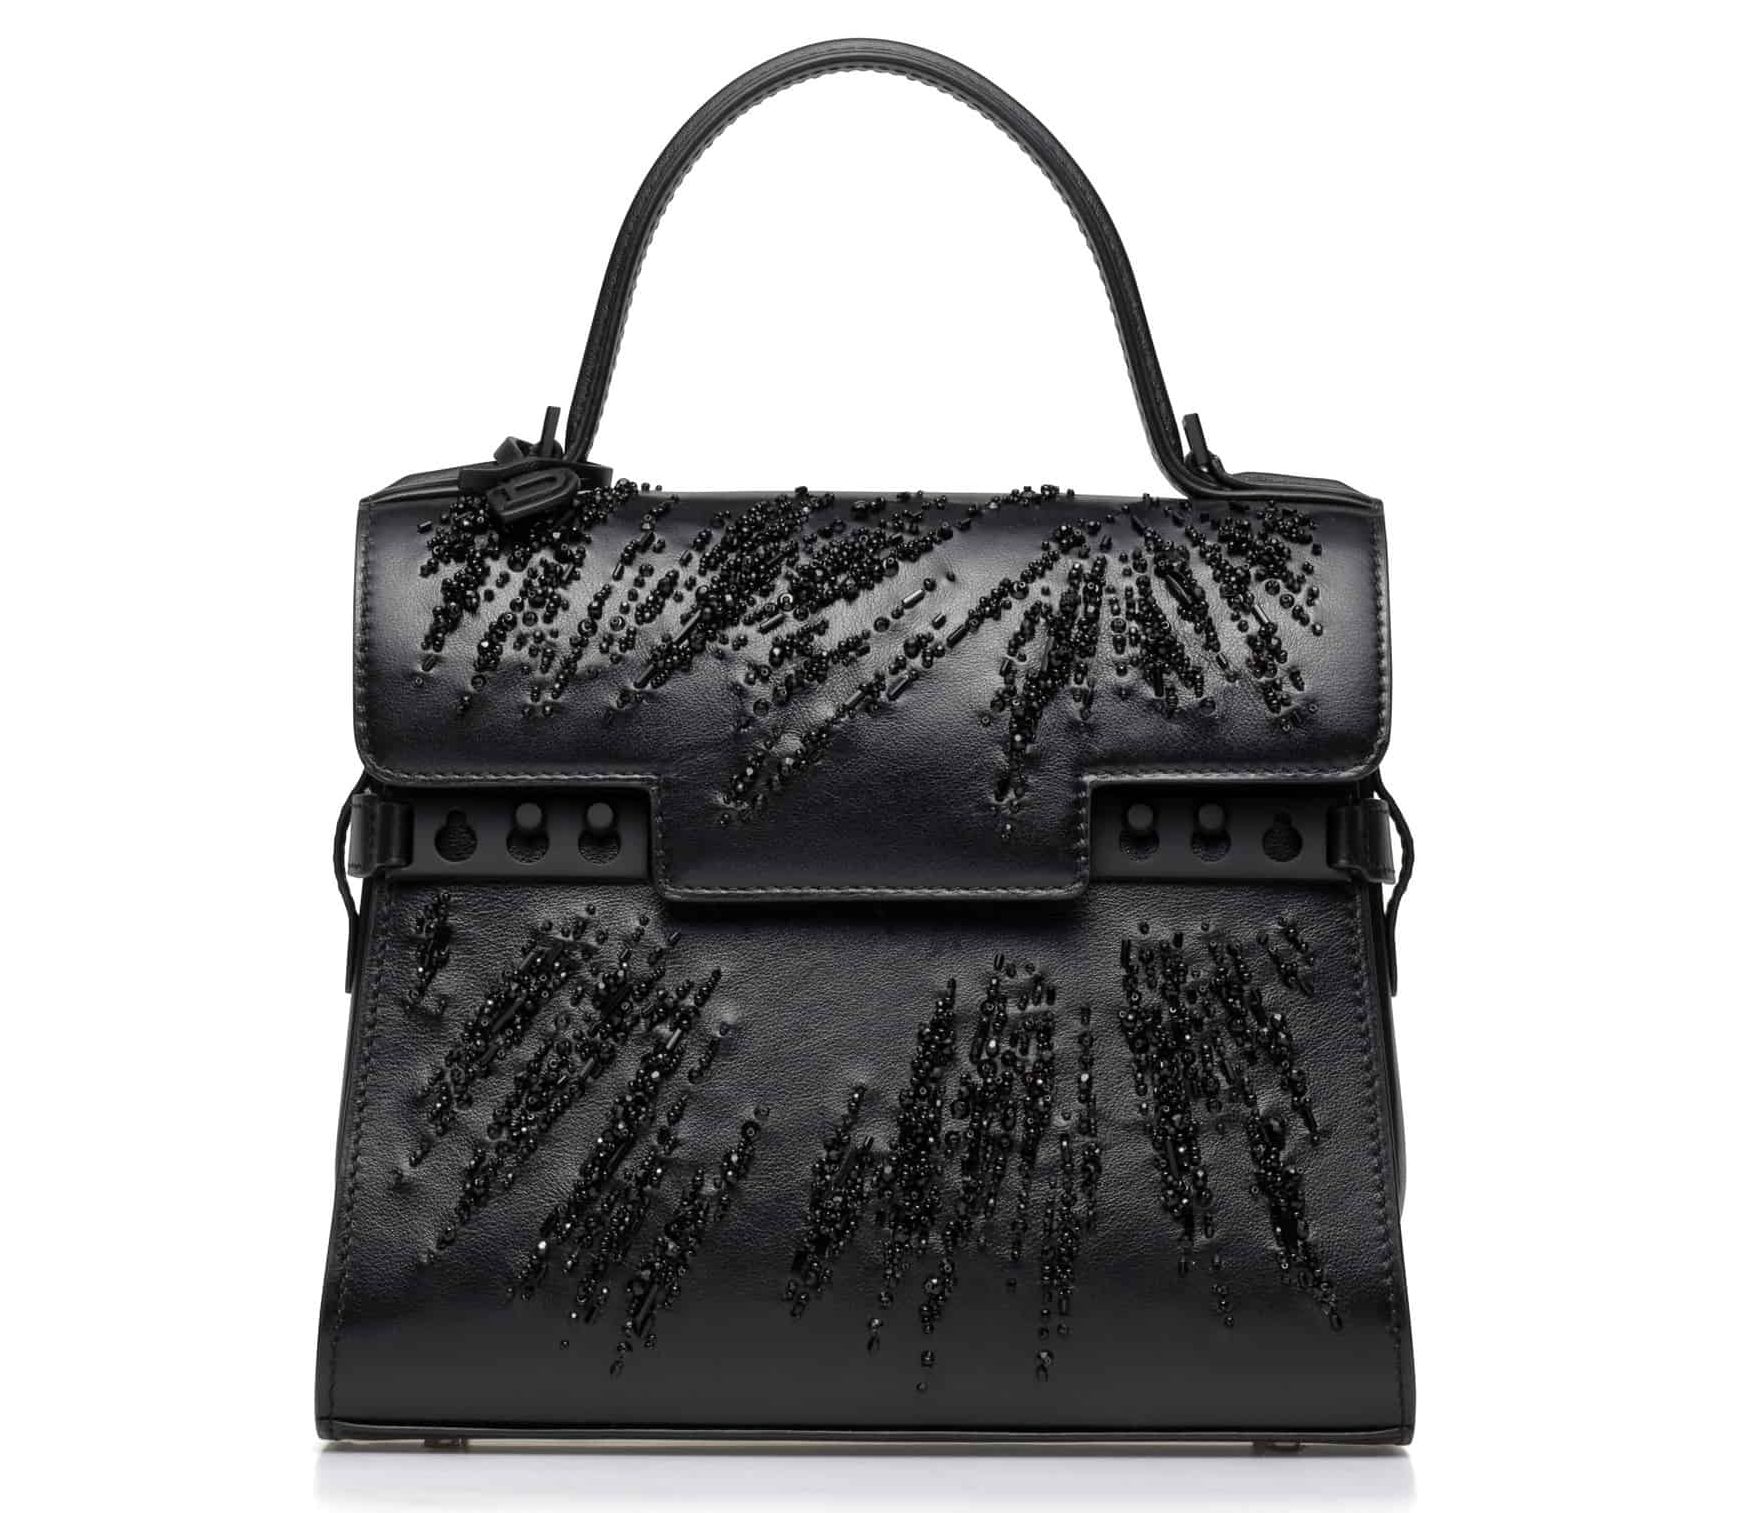 Delvaux: Why celebrities and Belgian royals are obsessed with this